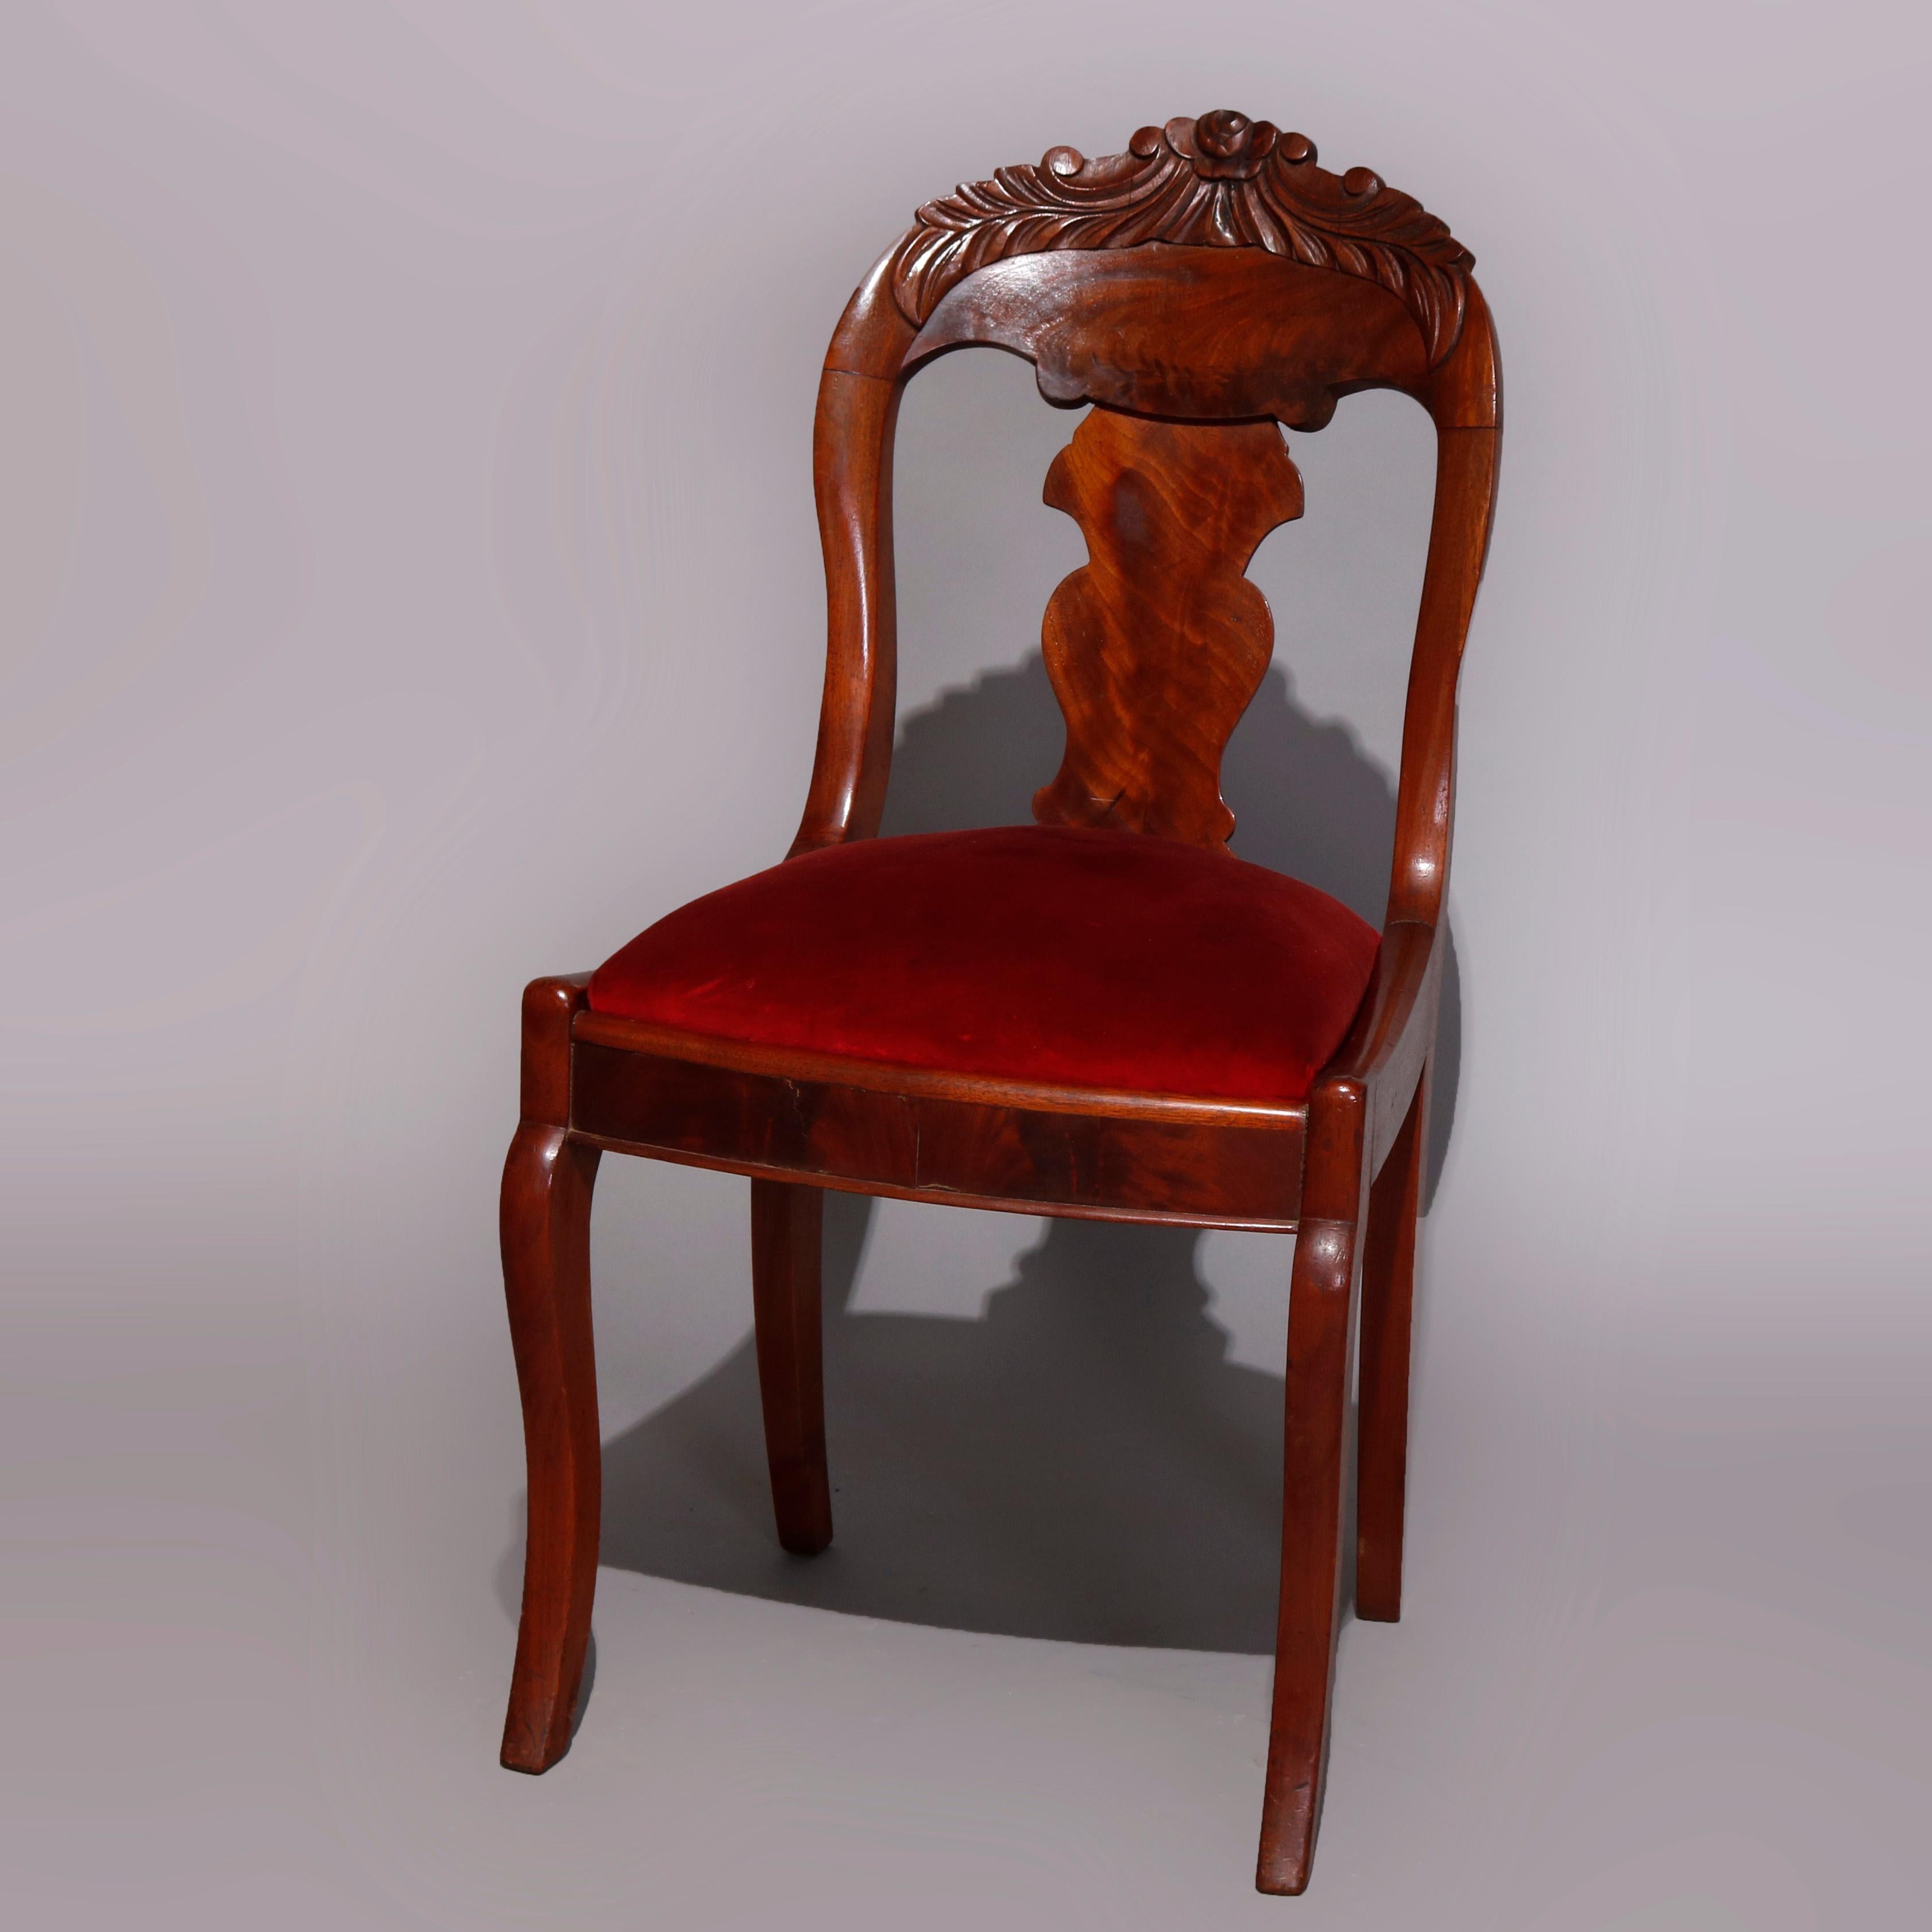 A set of six antique American Empire dining chairs offer flame mahogany construction in gondola form having carved foliate crests surmounting stylized urn form slat backs, upholstered seats, raised on cabriole legs, circa 1840

Measures: 33.5